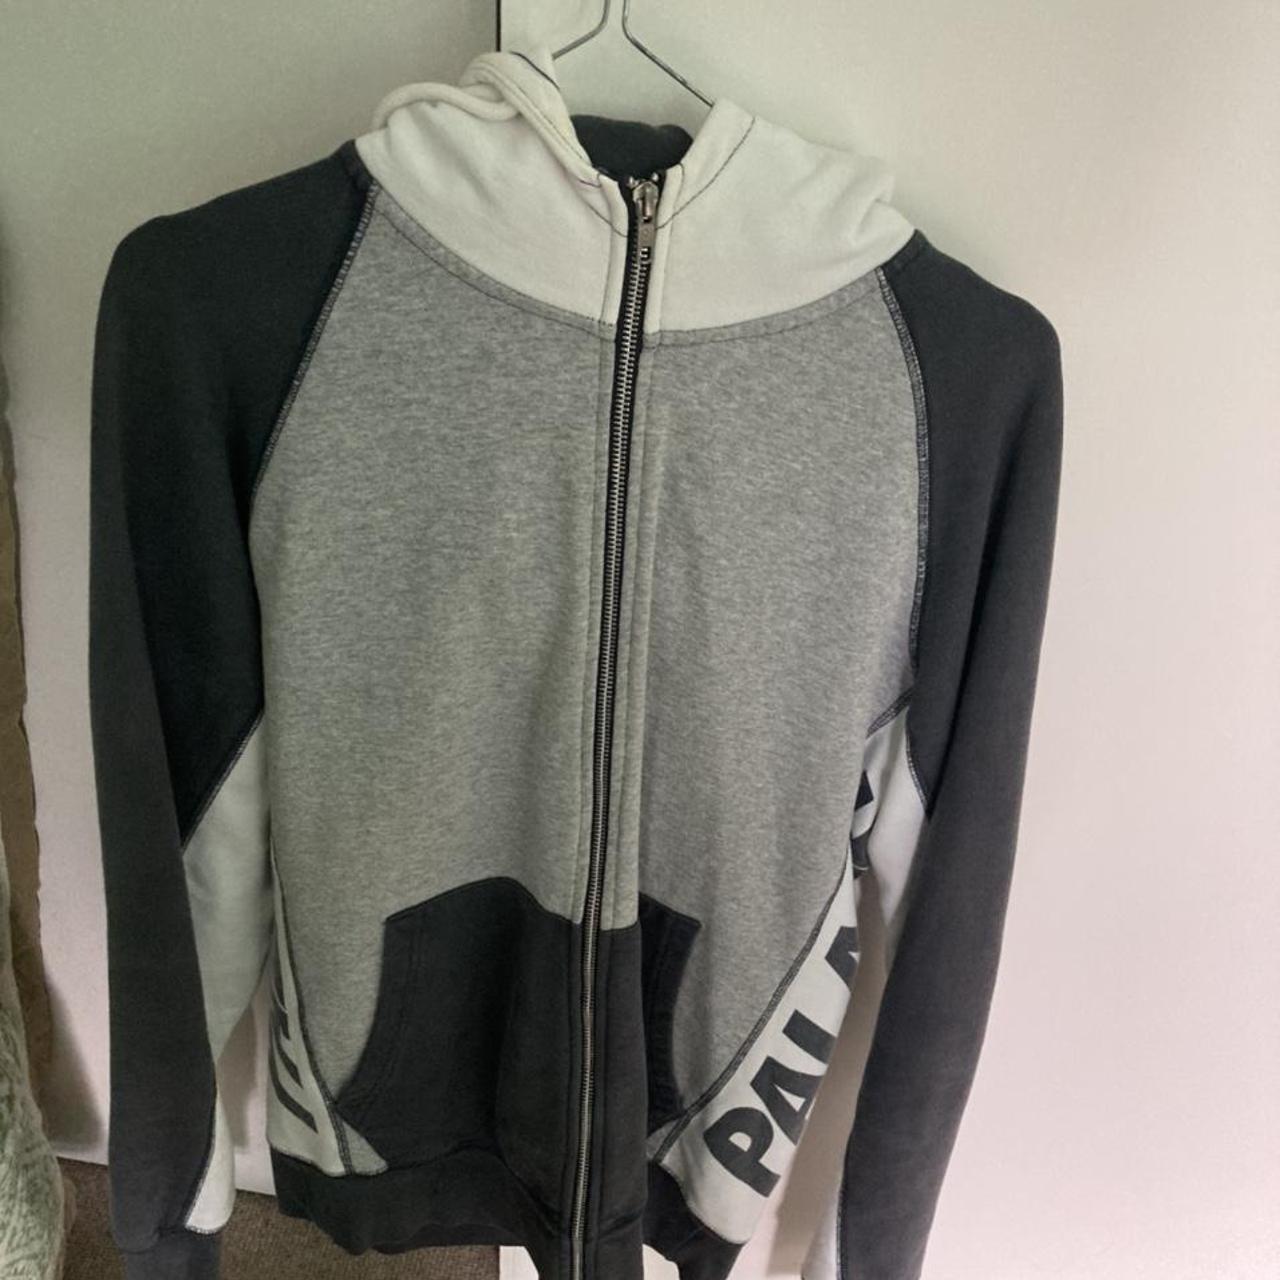 Rare grey/navy/white palace zip up hoodie in a size... - Depop